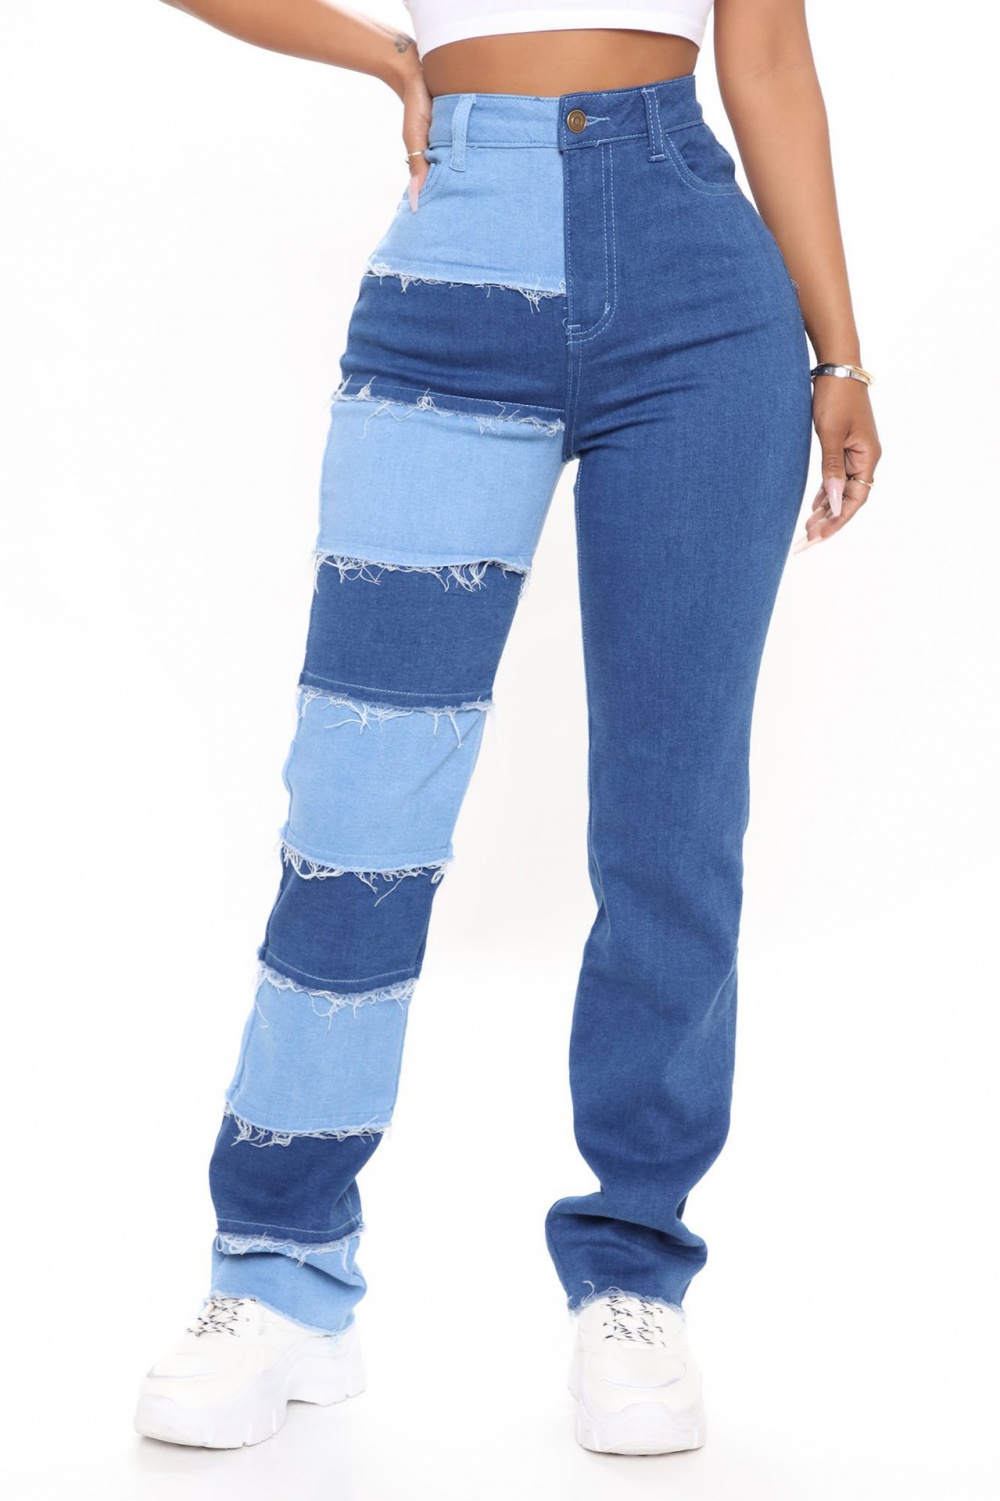 European style straight stitching jeans for women